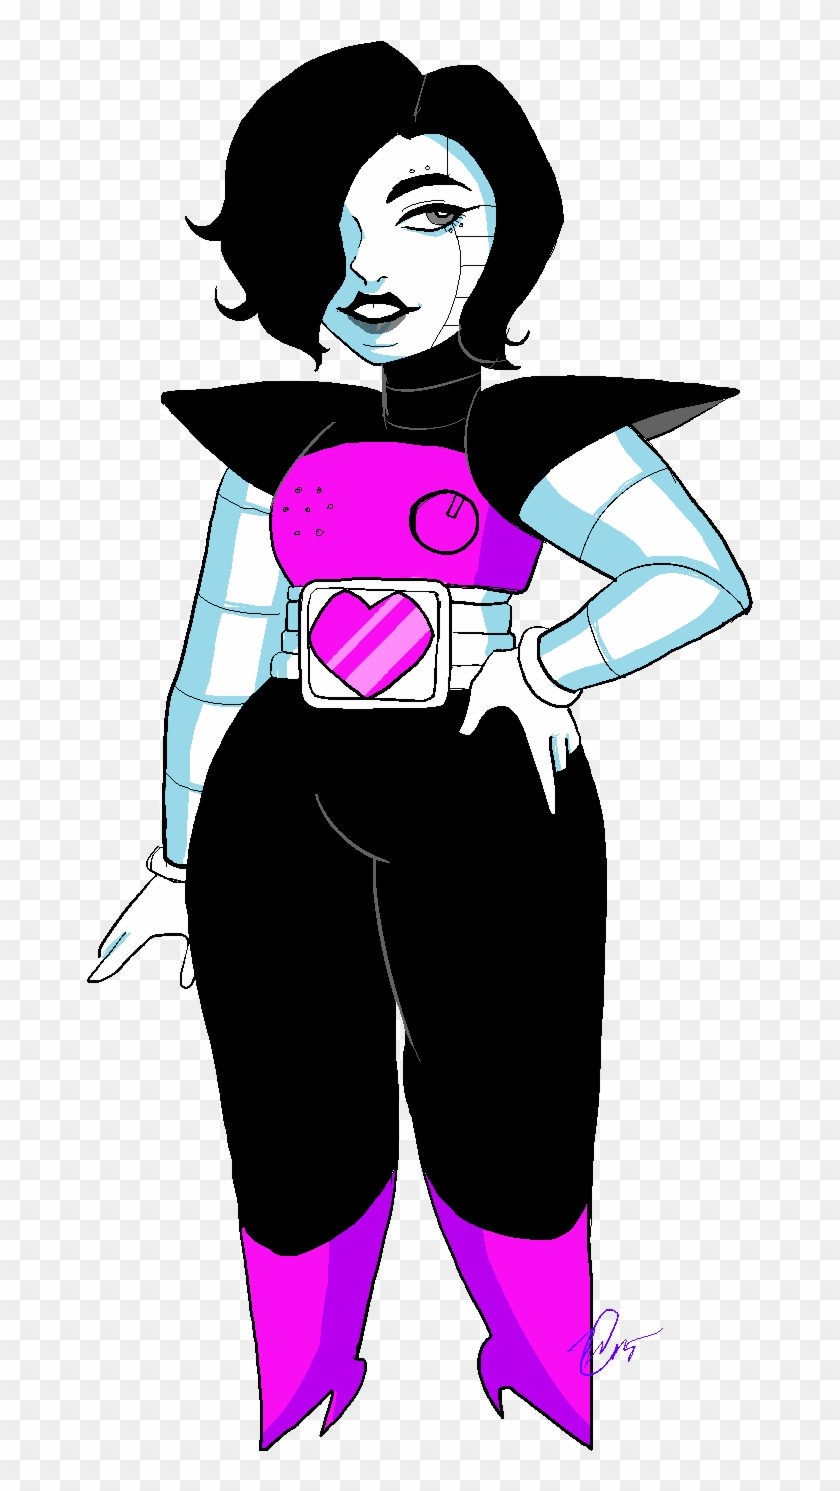 I Finished That Chubby Mettaton Doodle From Earlier - Cartoon #663437